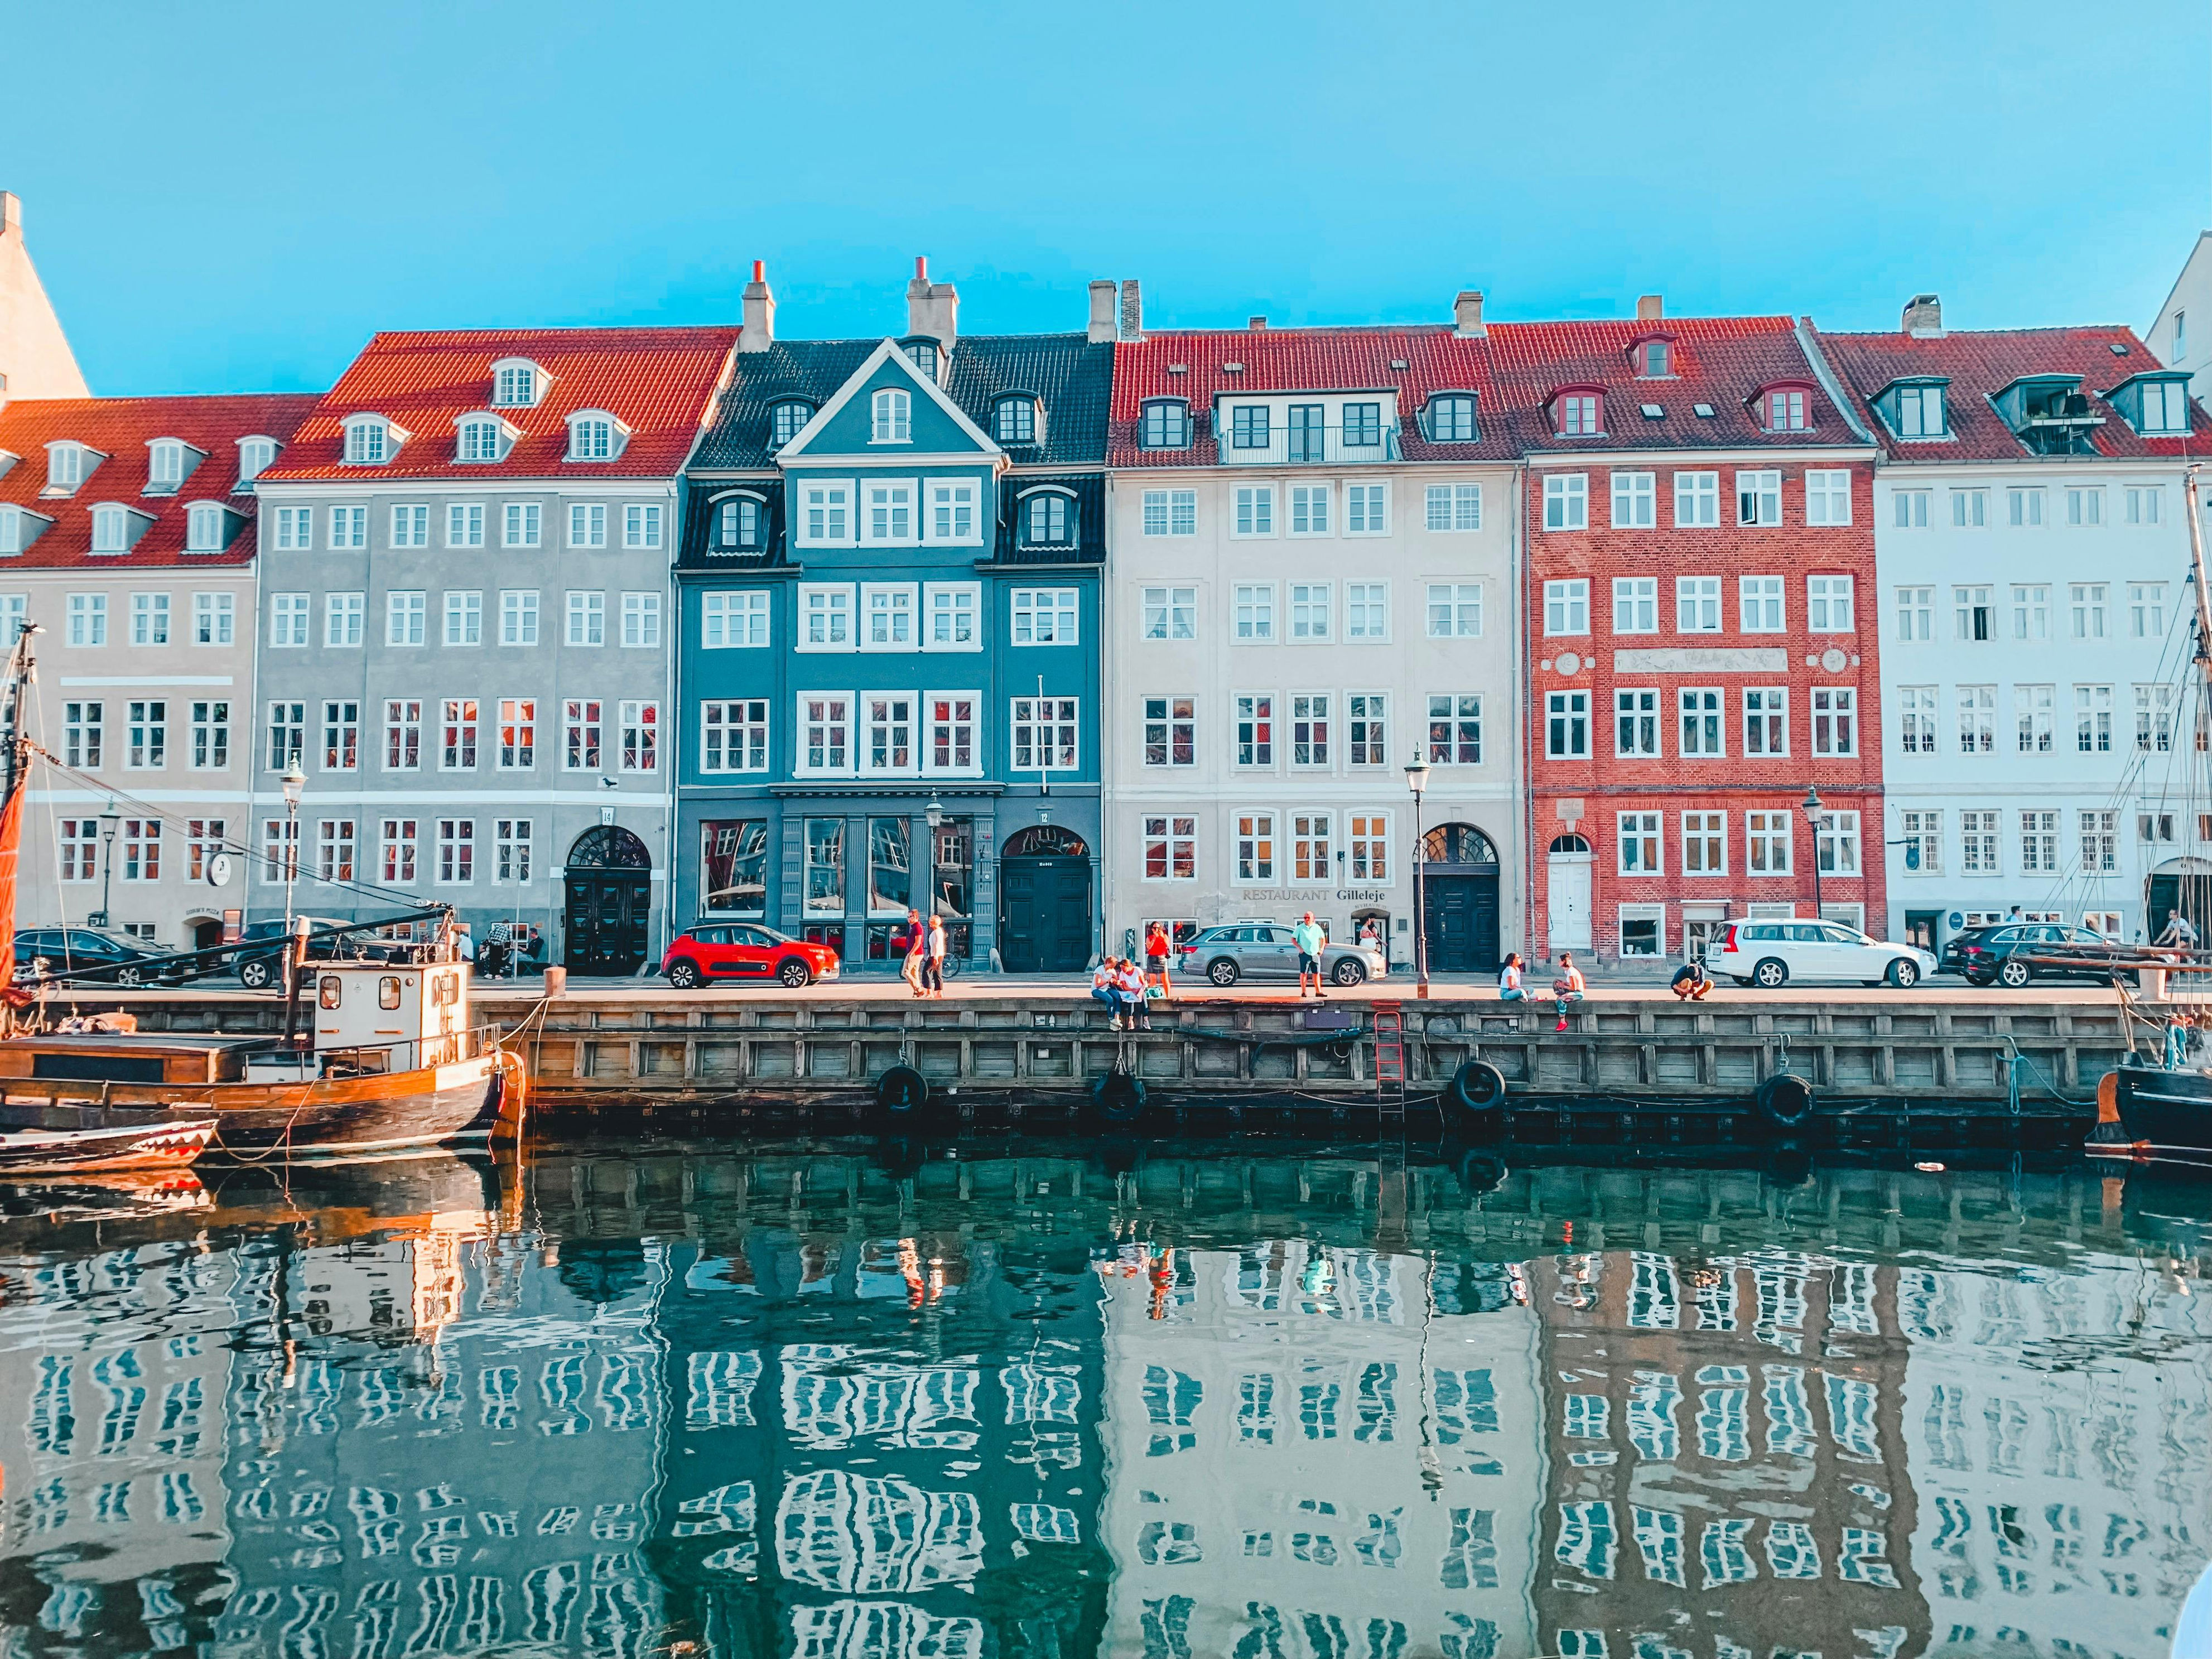 <h3>Copenhagen, Denmark</h3><p>Within the past few years, Denmark's capital has emerged from under-the-radar locale to a must-see destination for in-the-know travelers. Copenhagen was named one of the <a href="https://www.brit.co/happiest-cities-in-the-world/"><strong>happiest cities in the world</strong></a> and in our expert opinion, it's also one of the most beautiful, thanks to Nyhavn, the famous 17th century harbor. First time visitors should stay downtown in Indre By, which is centrally located to fun activities and some of the most picturesque parts of the city. We recommend Hotel Bethel or The Socialist, for a more luxe hotel option. Stroll down the waterway and explore the medieval architecture, like Rosenborg Castle. Wander into Tivoli Gardens, a small amusement park with aesthetic gardens. Embrace the playfulness of Scandi Girl style, by supporting CPH-based designers like <strong><a href="https://fave.co/3xJZKyS">Saks Potts</a></strong> and <strong><a href="https://fave.co/3W9HpoM">Ganni</a></strong>.</p>